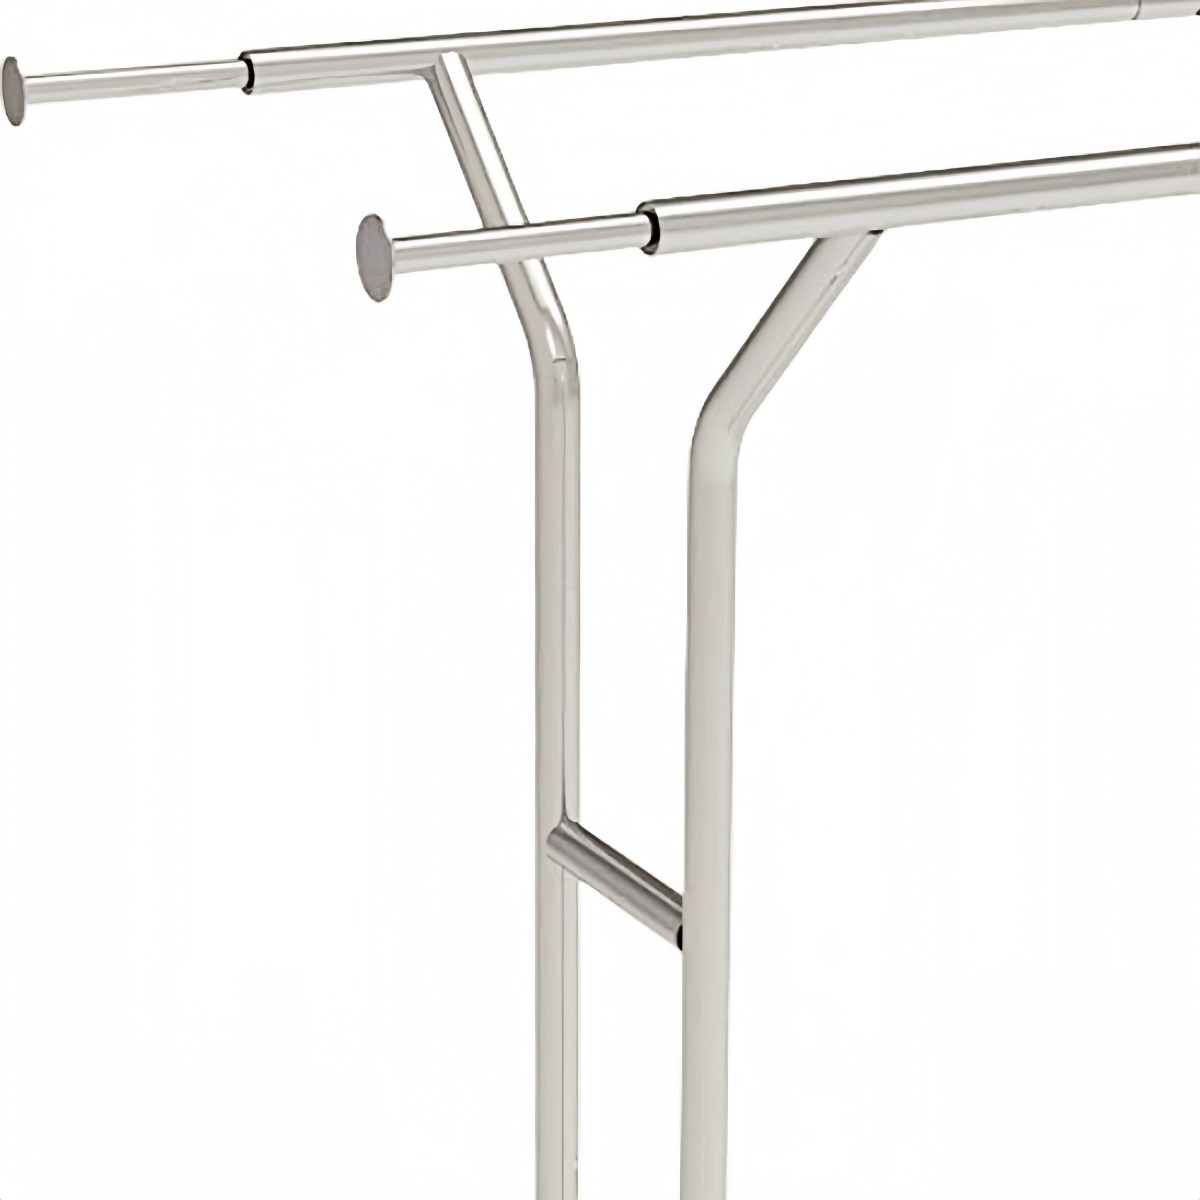 Wisdomfur Heavy Duty Clothing Rack with Wheels, shelf Clothing Racks for Hanging Clothes Rolling Clothes Rack Adjustable Garment Rack Commercial Portable Clothes Rack - Chrome